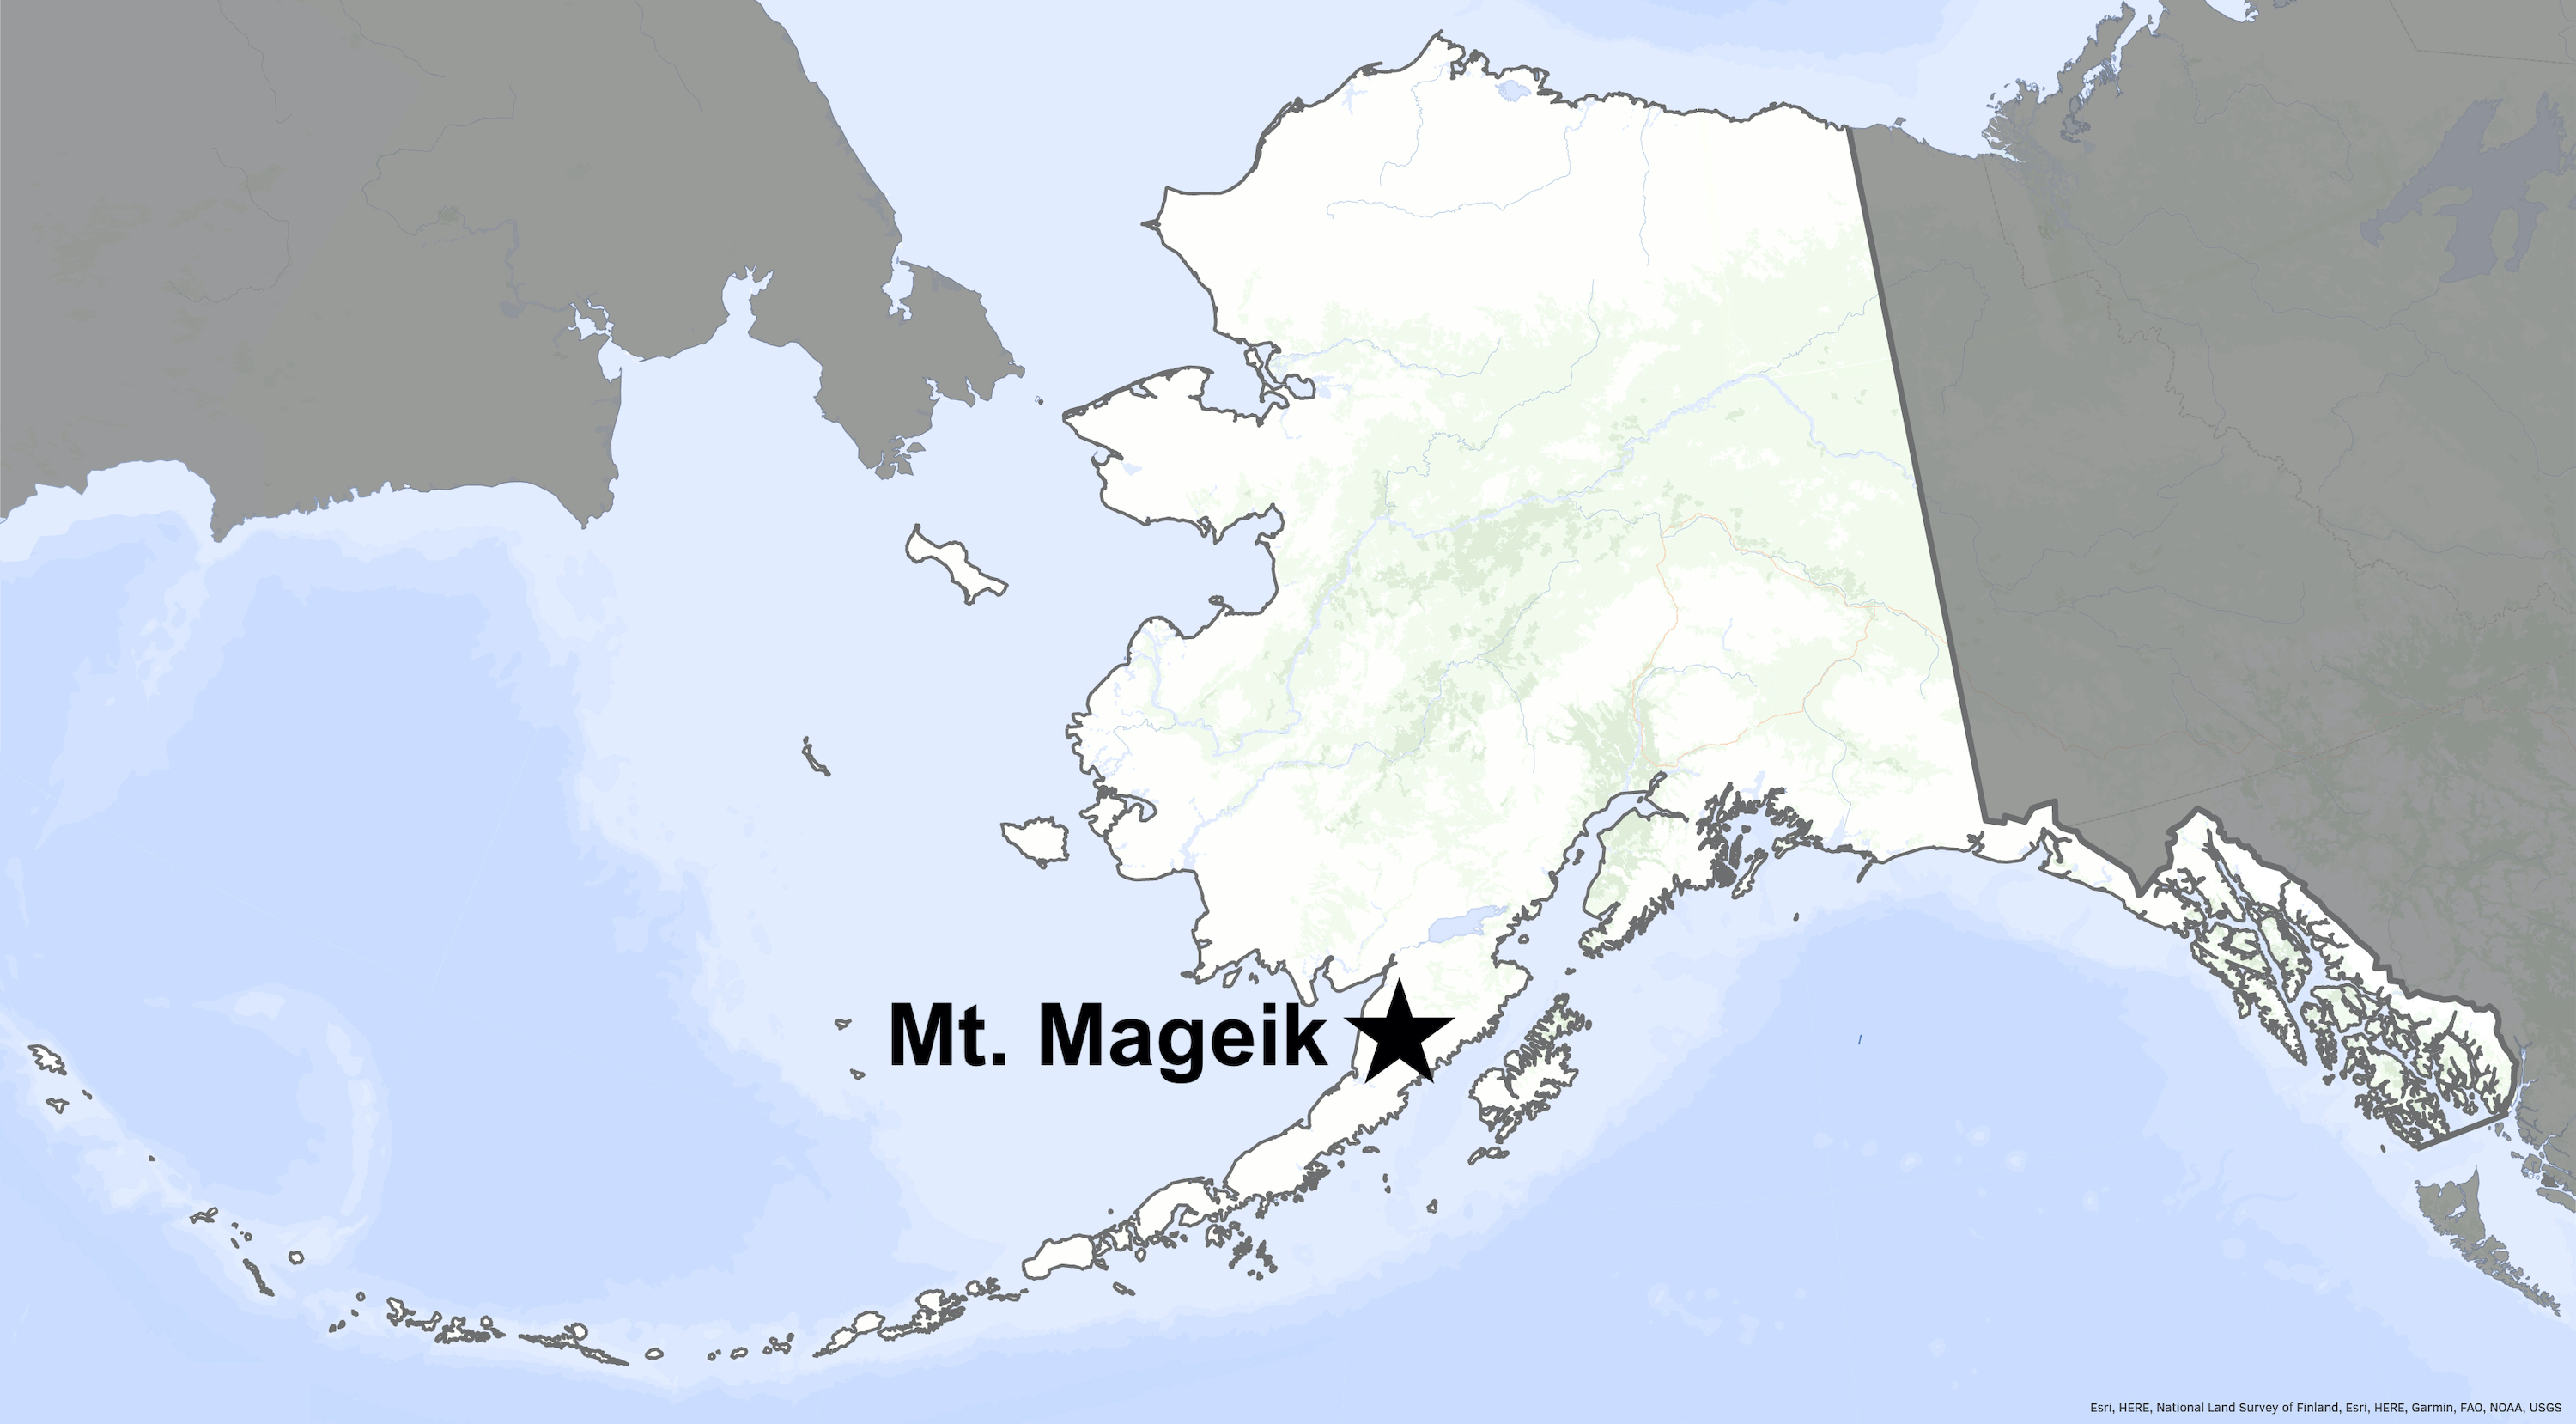 A star on a map of Alaska indicates the location of Mount Mageik.